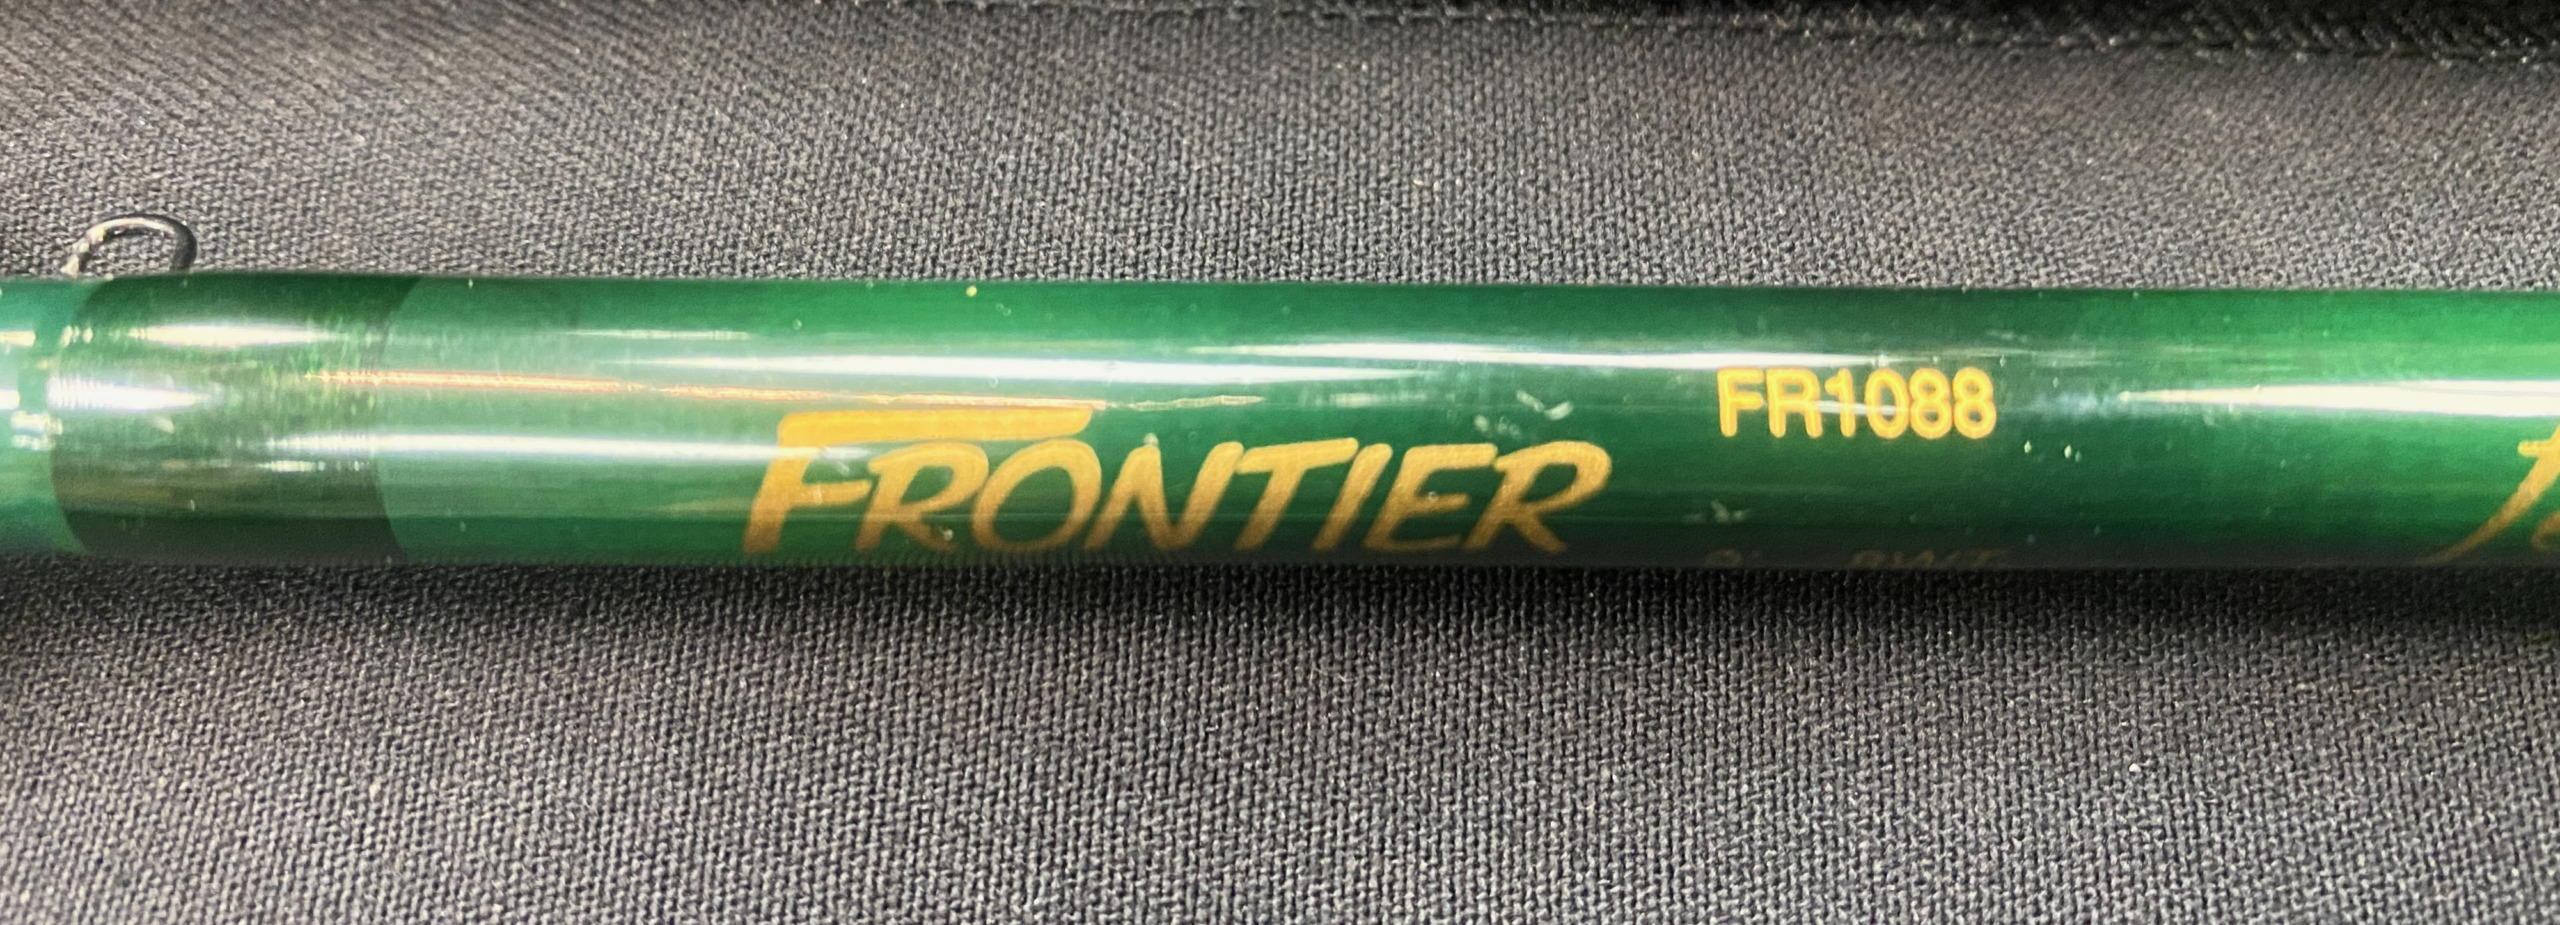 https://thefirstcast.ca/wp-content/uploads/2021/03/G-Loomis-Frontier-FR1088-Fly-Rod-A-scaled.jpeg